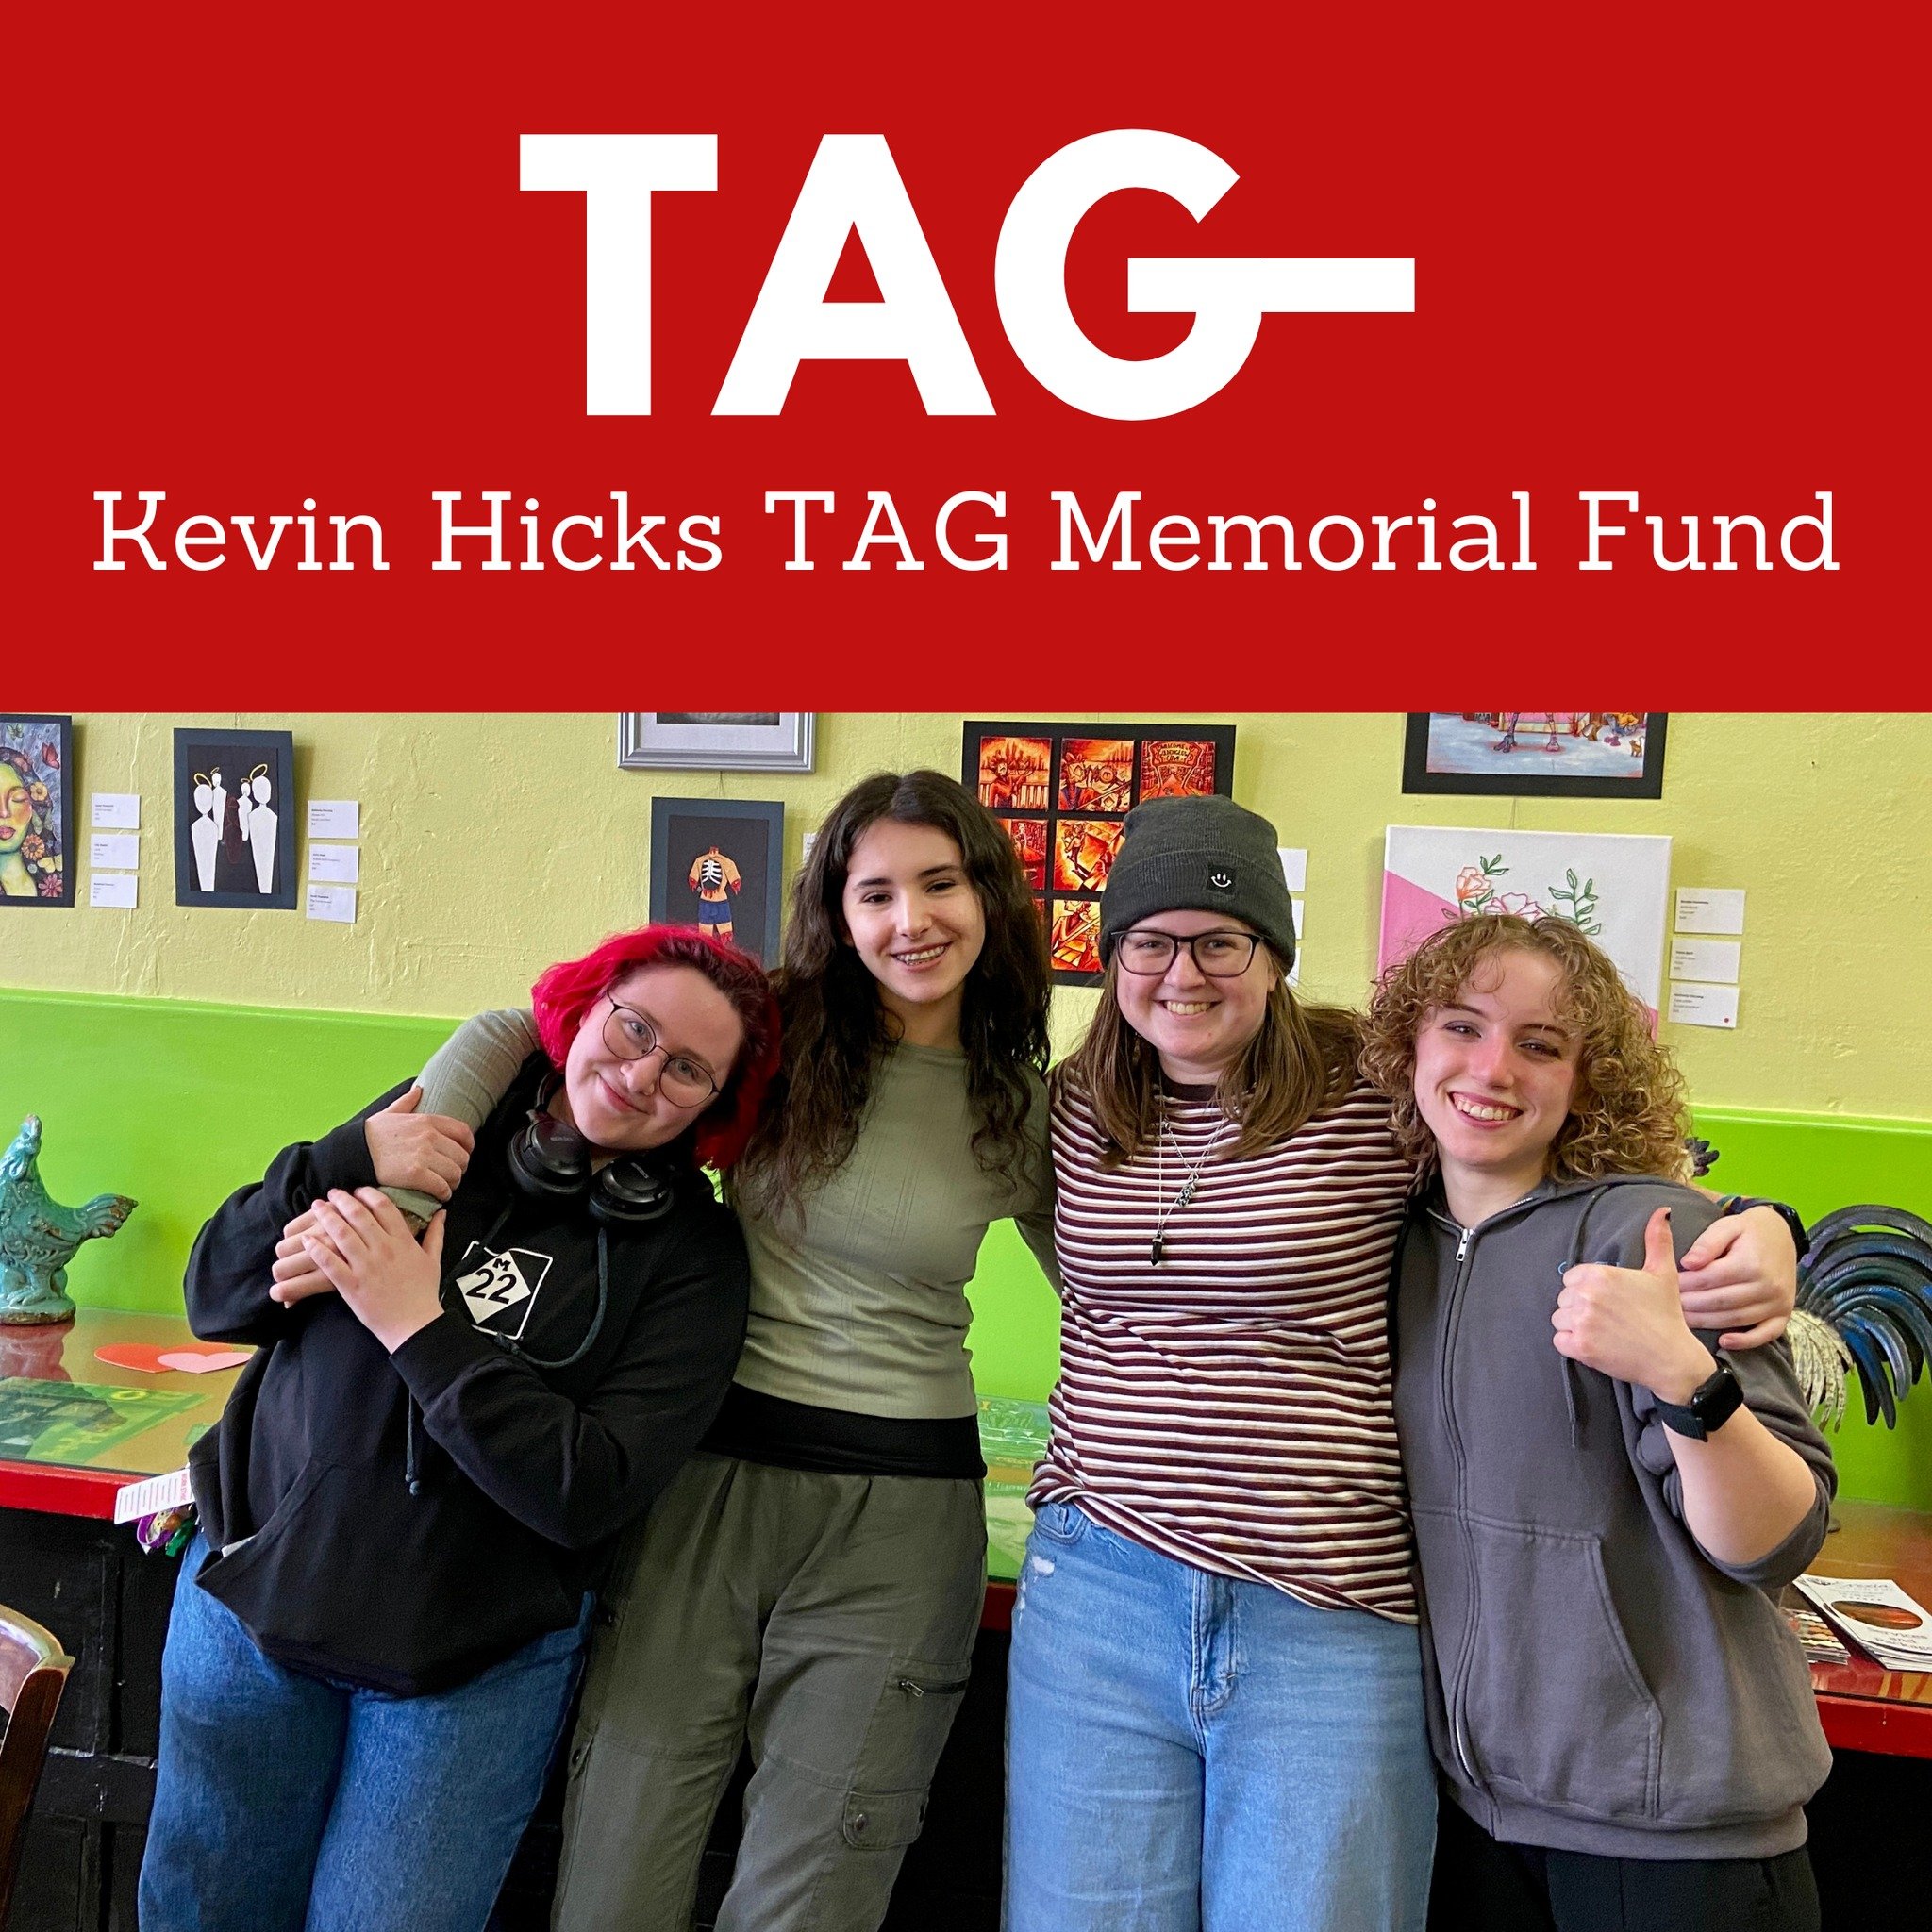 We are honored to announce the launch of the Kevin Hicks TAG Memorial Fund, founded my Kathryn &amp; Tim Harris. 

Kevin was a 2006 graduate of Chesterton High School and was passionate about art. He loved drawing, woodworking, and sculpting. Kevin e